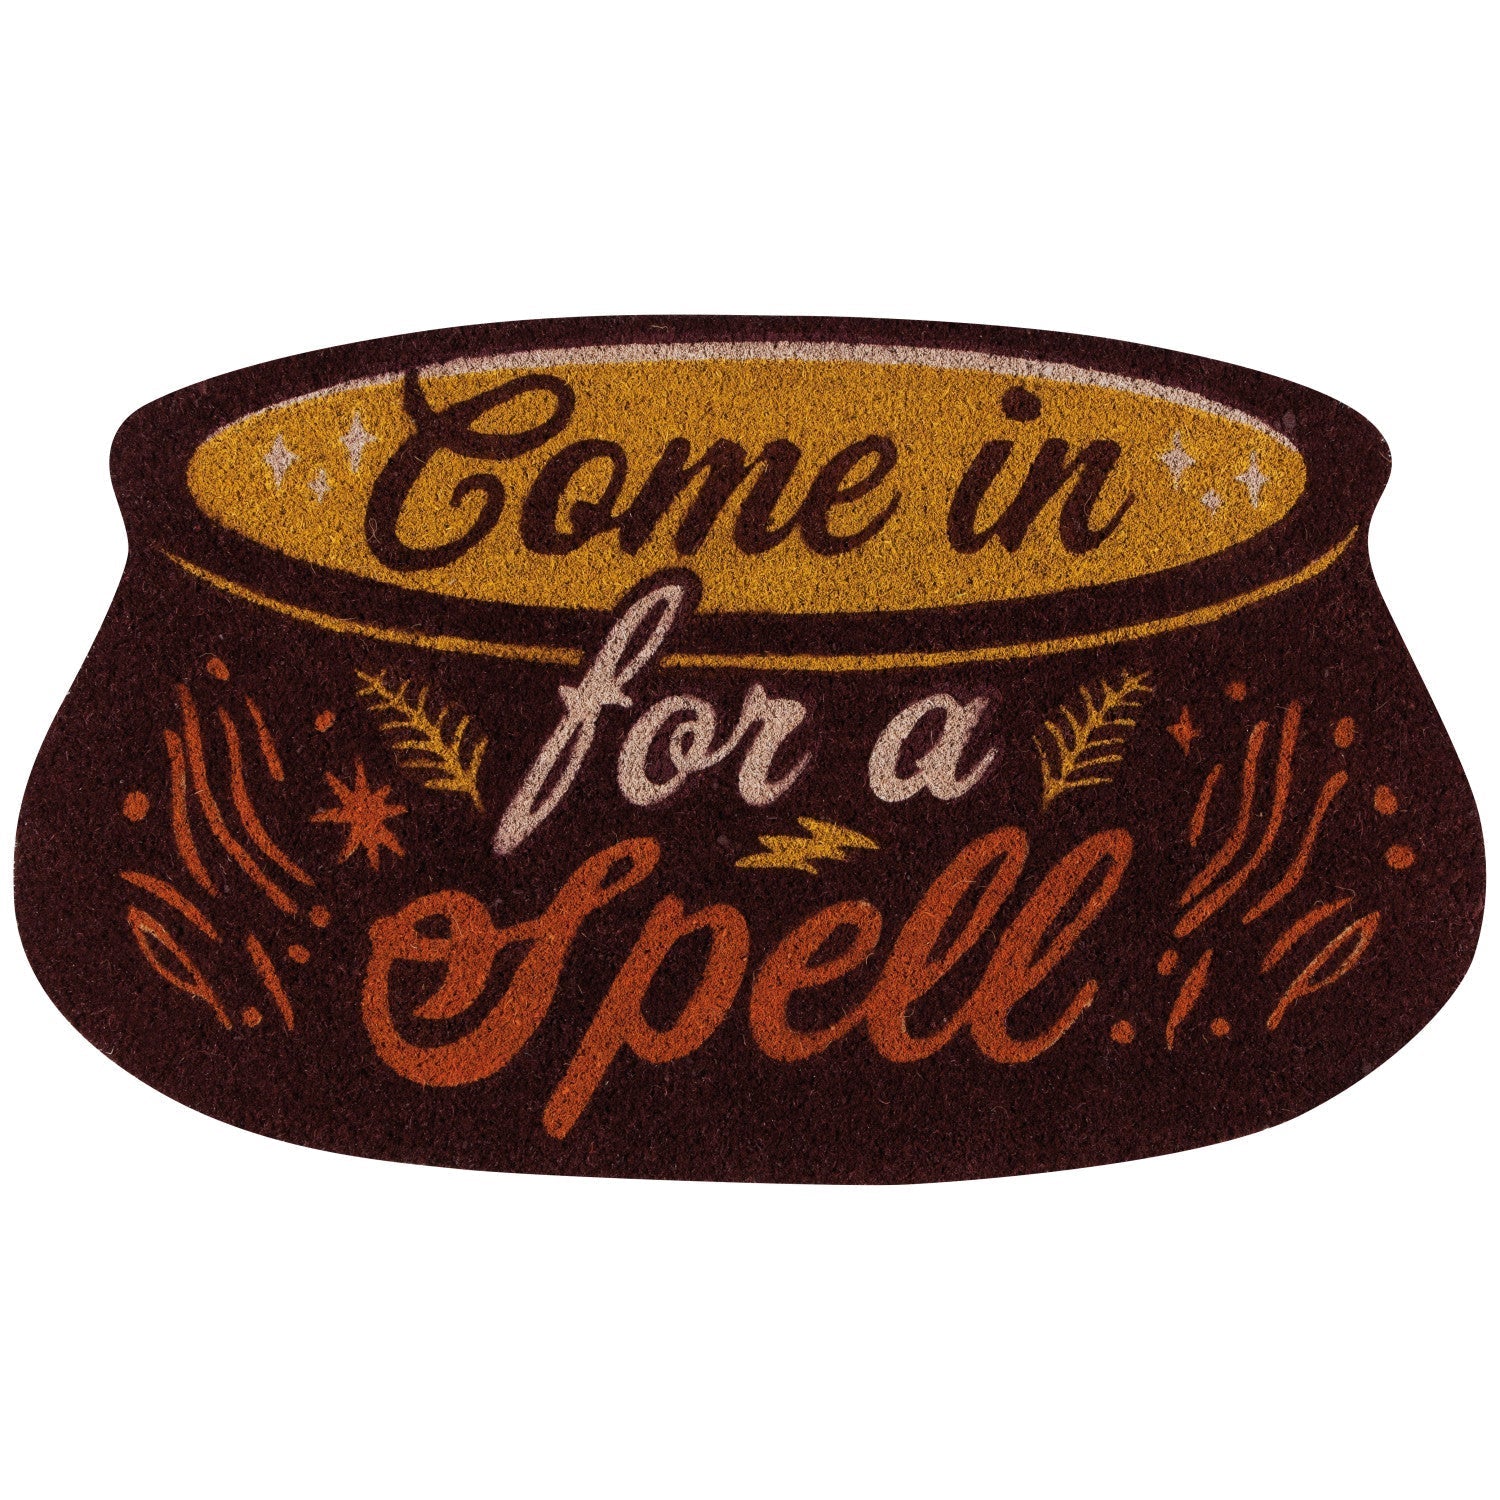 Come In For A Spell Spellbound Decorative Coir Doormat | Welcome Rug Mat | 18" x 30"